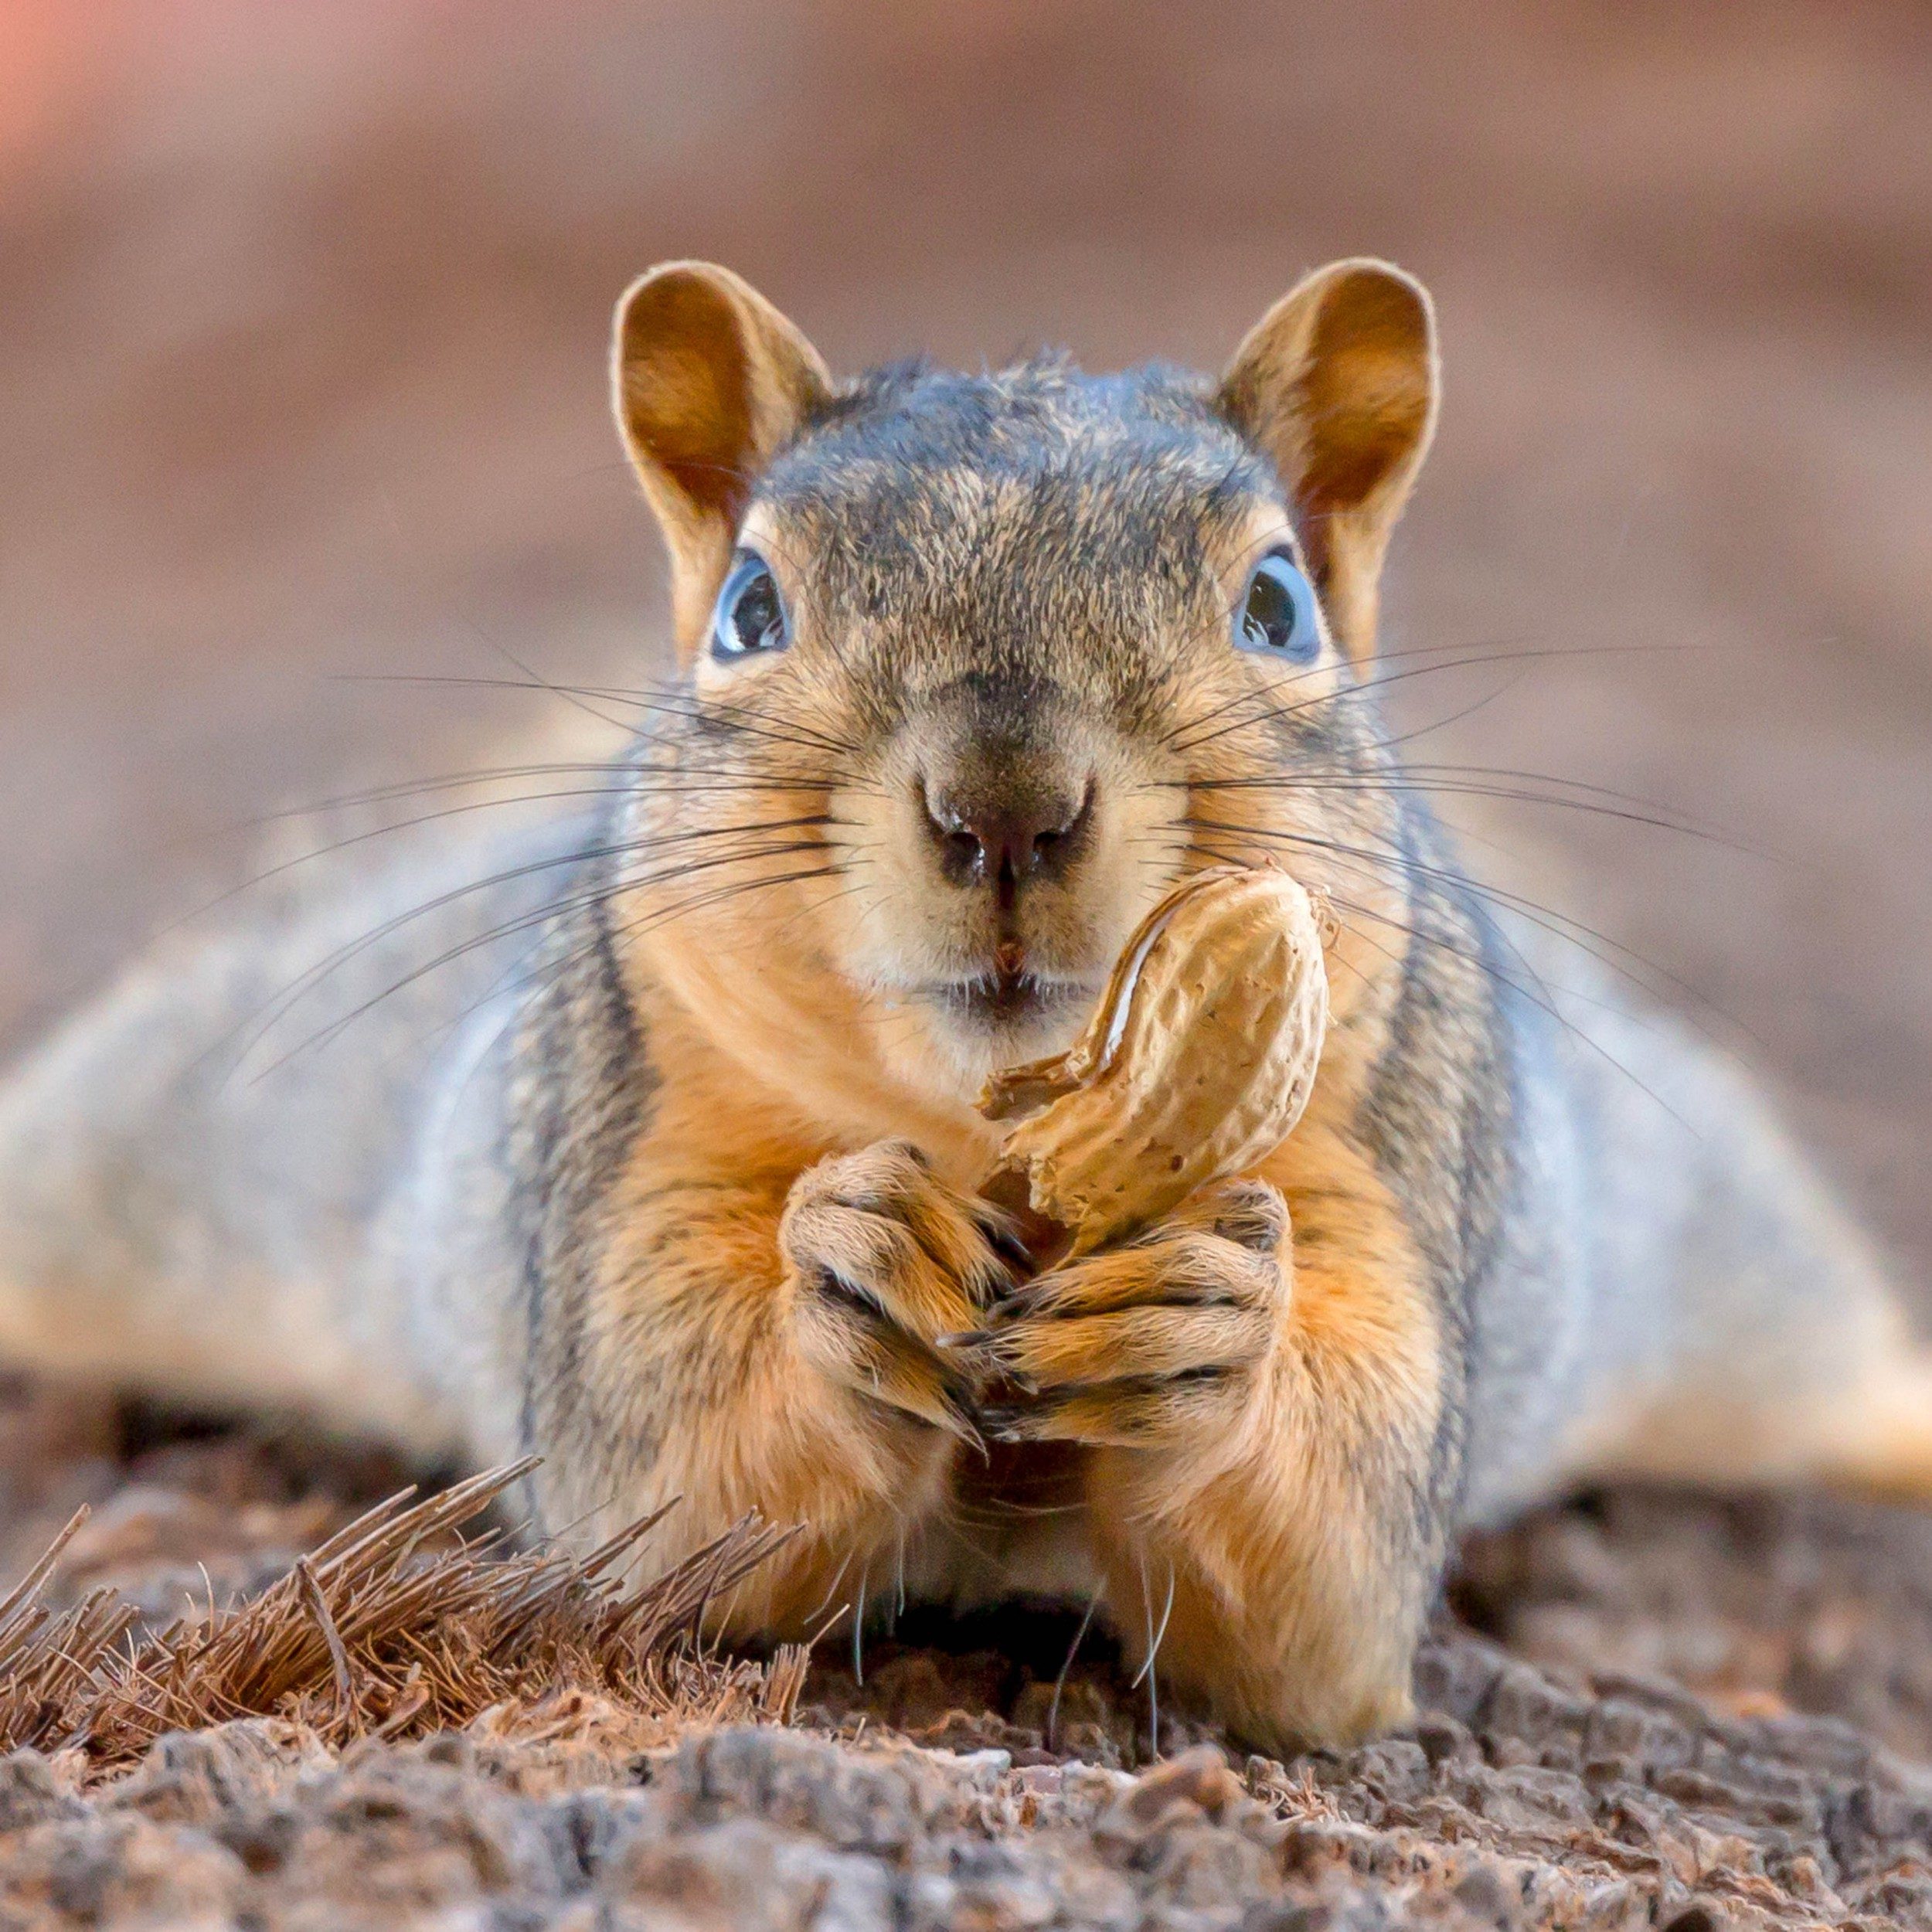 A squirrel has been snapped posing with a nut, in a pose that would ...